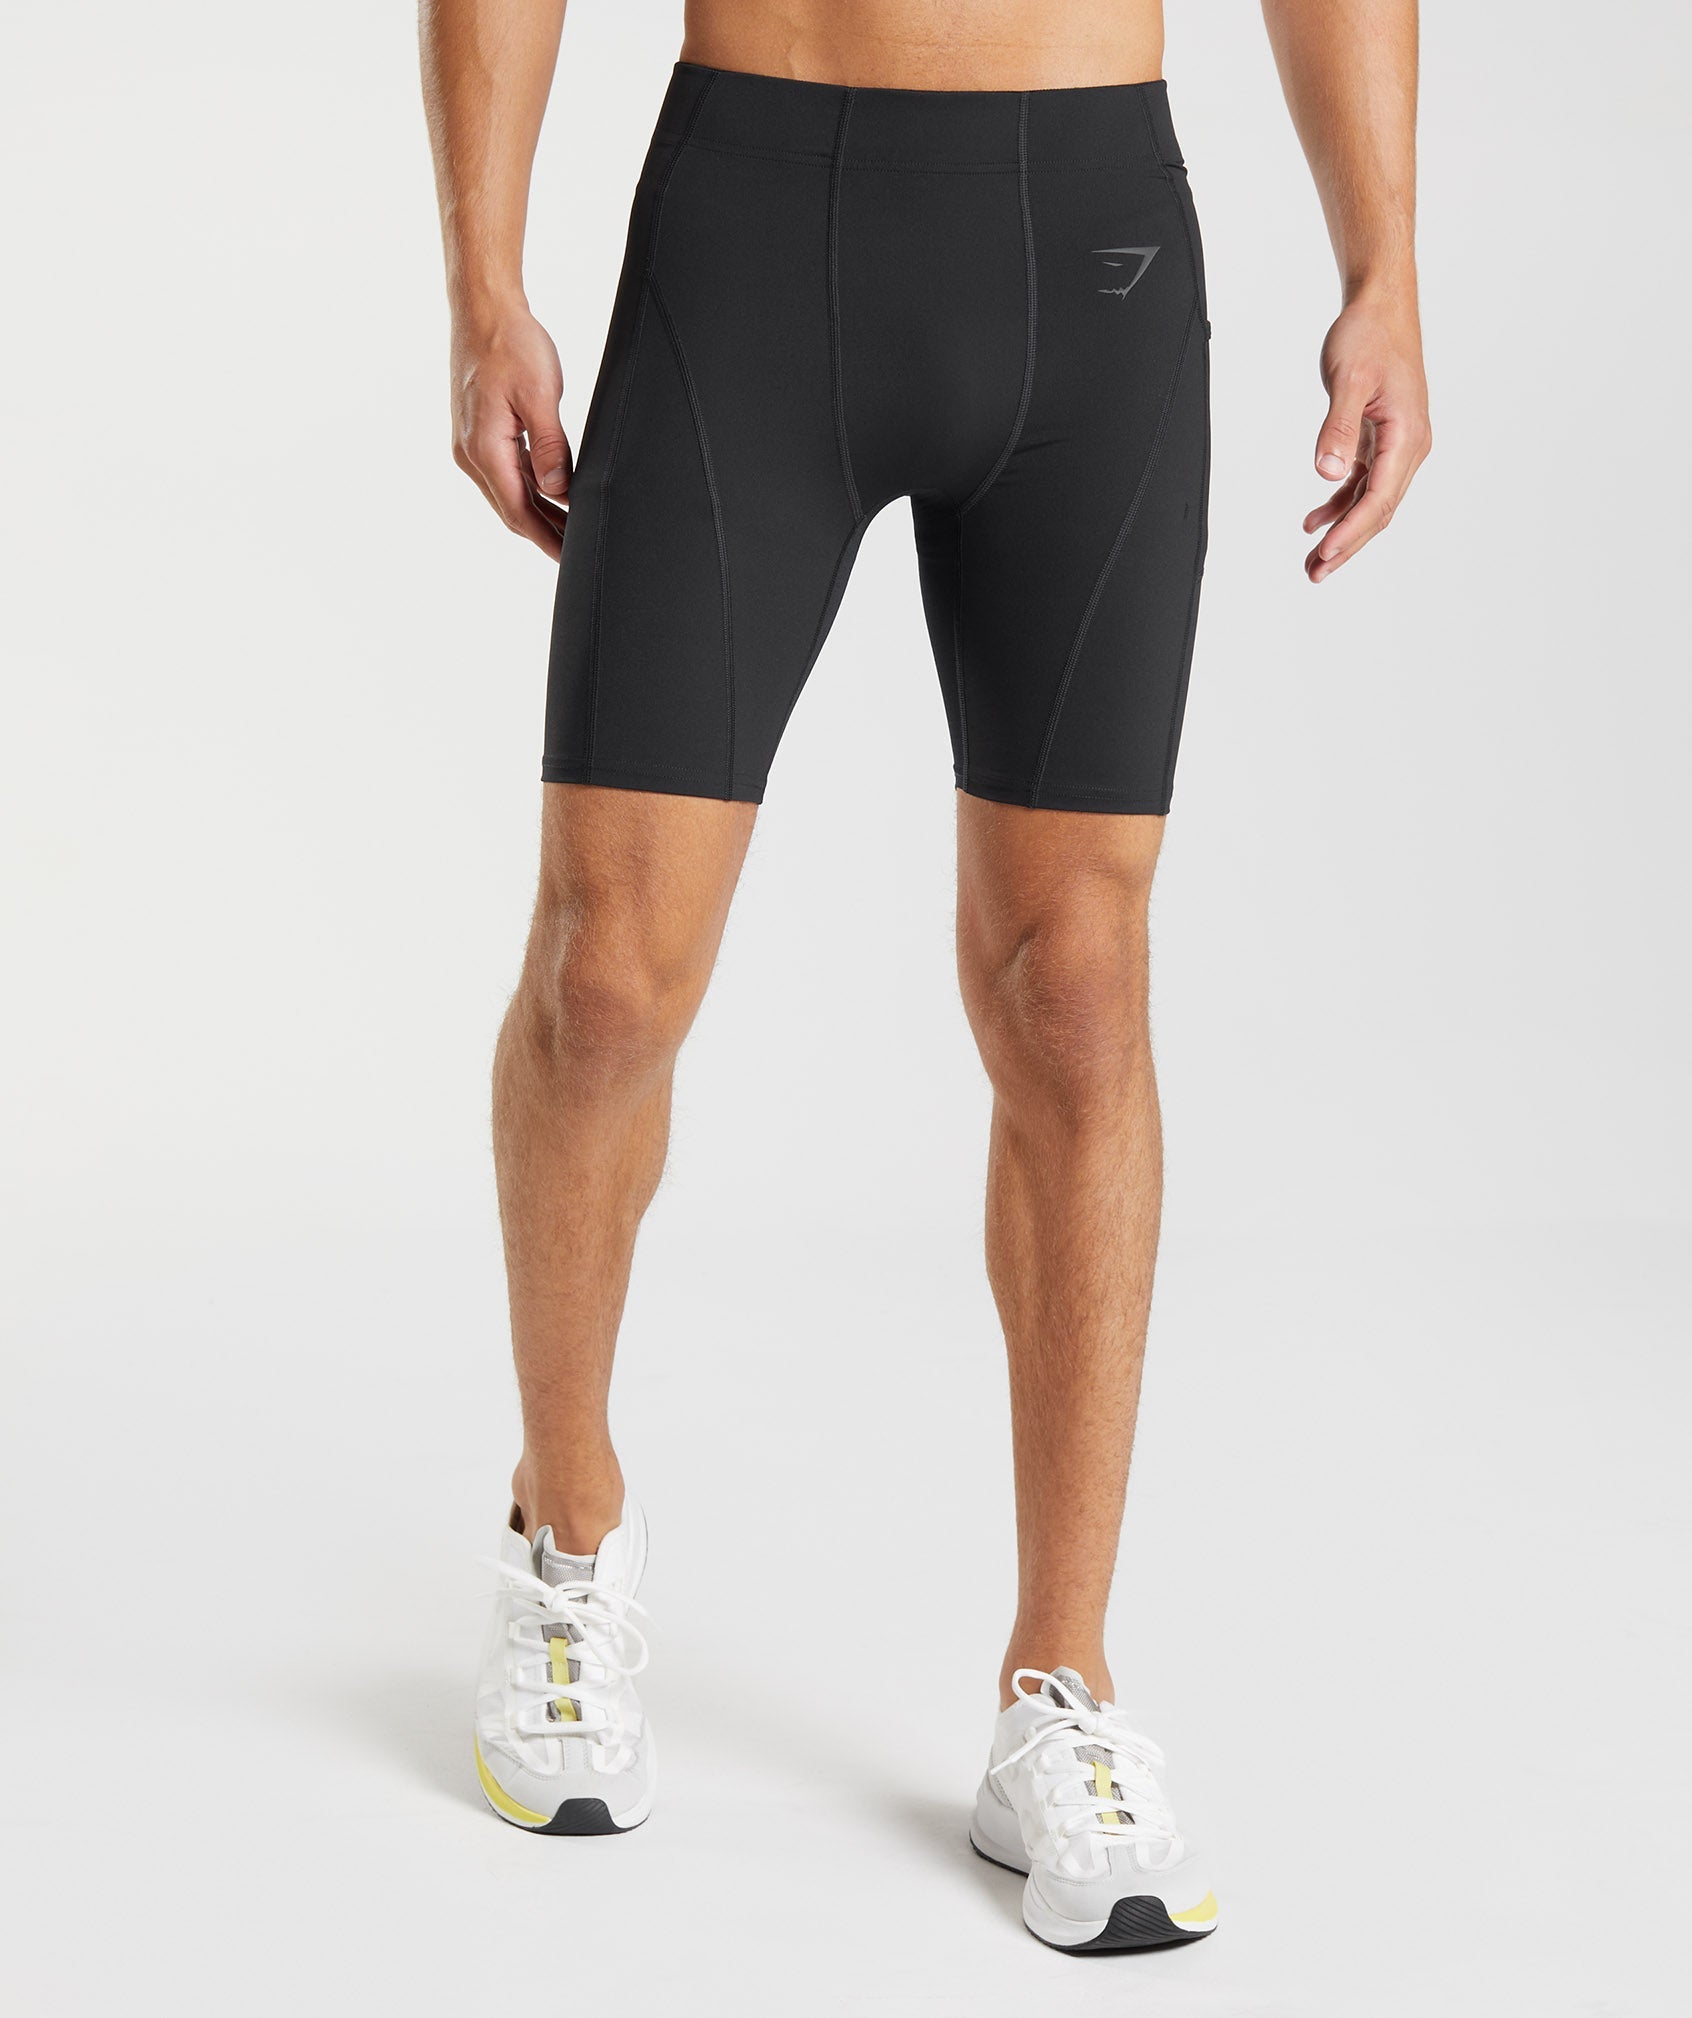 Ultima Compression Shorts with Optional Groin Wrap 